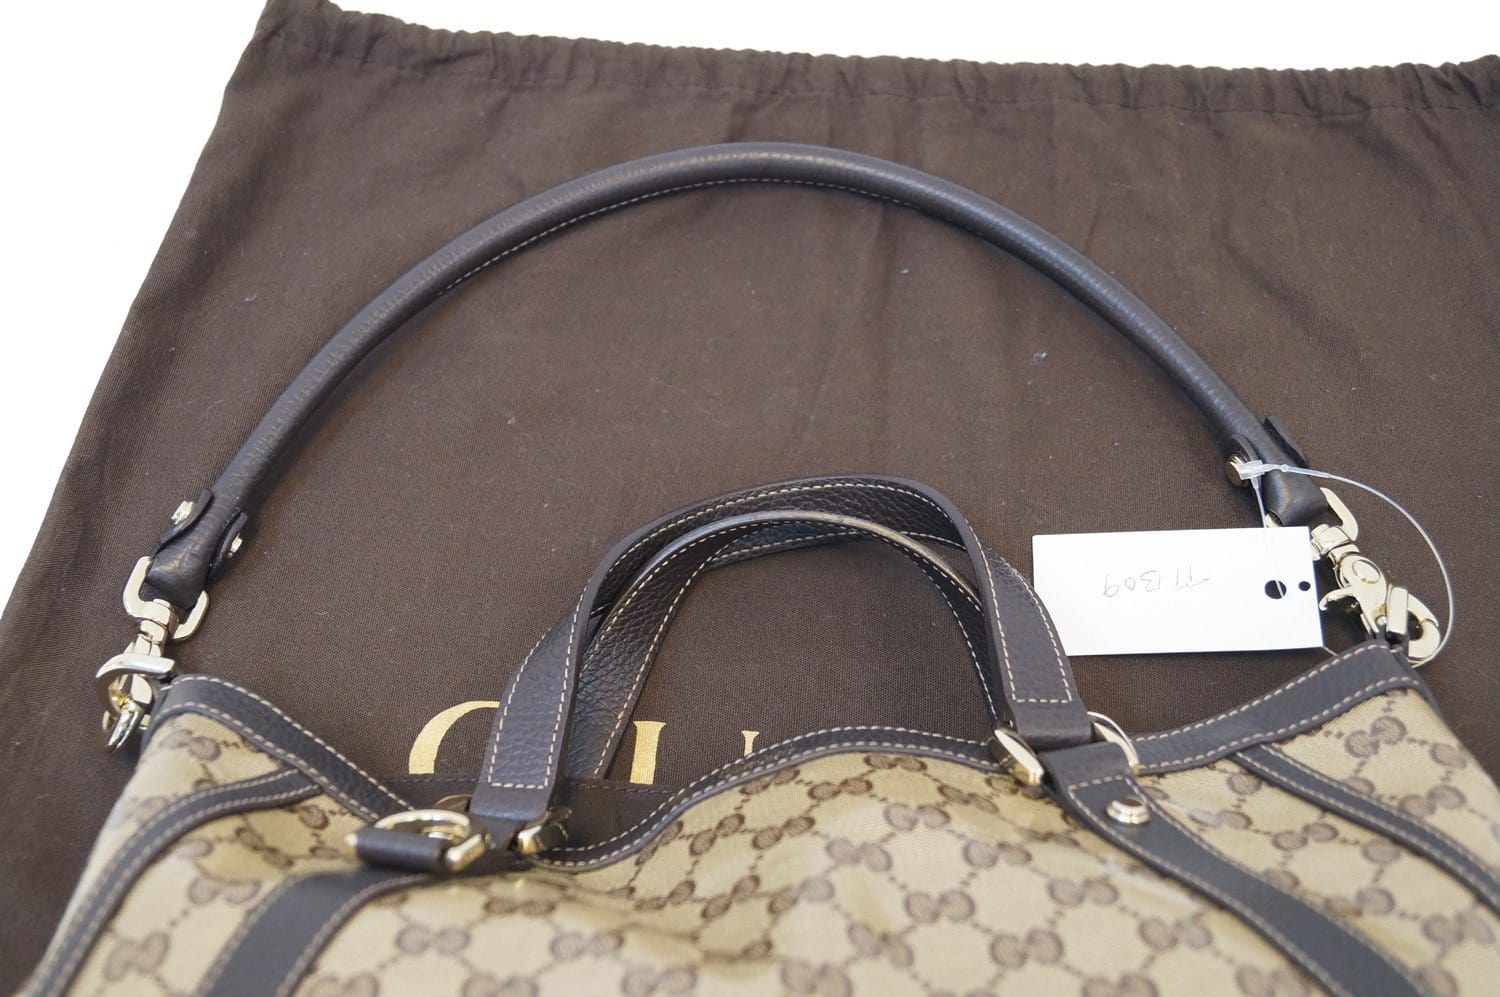 Gucci Vintage Abbey Coated Canvas Bag